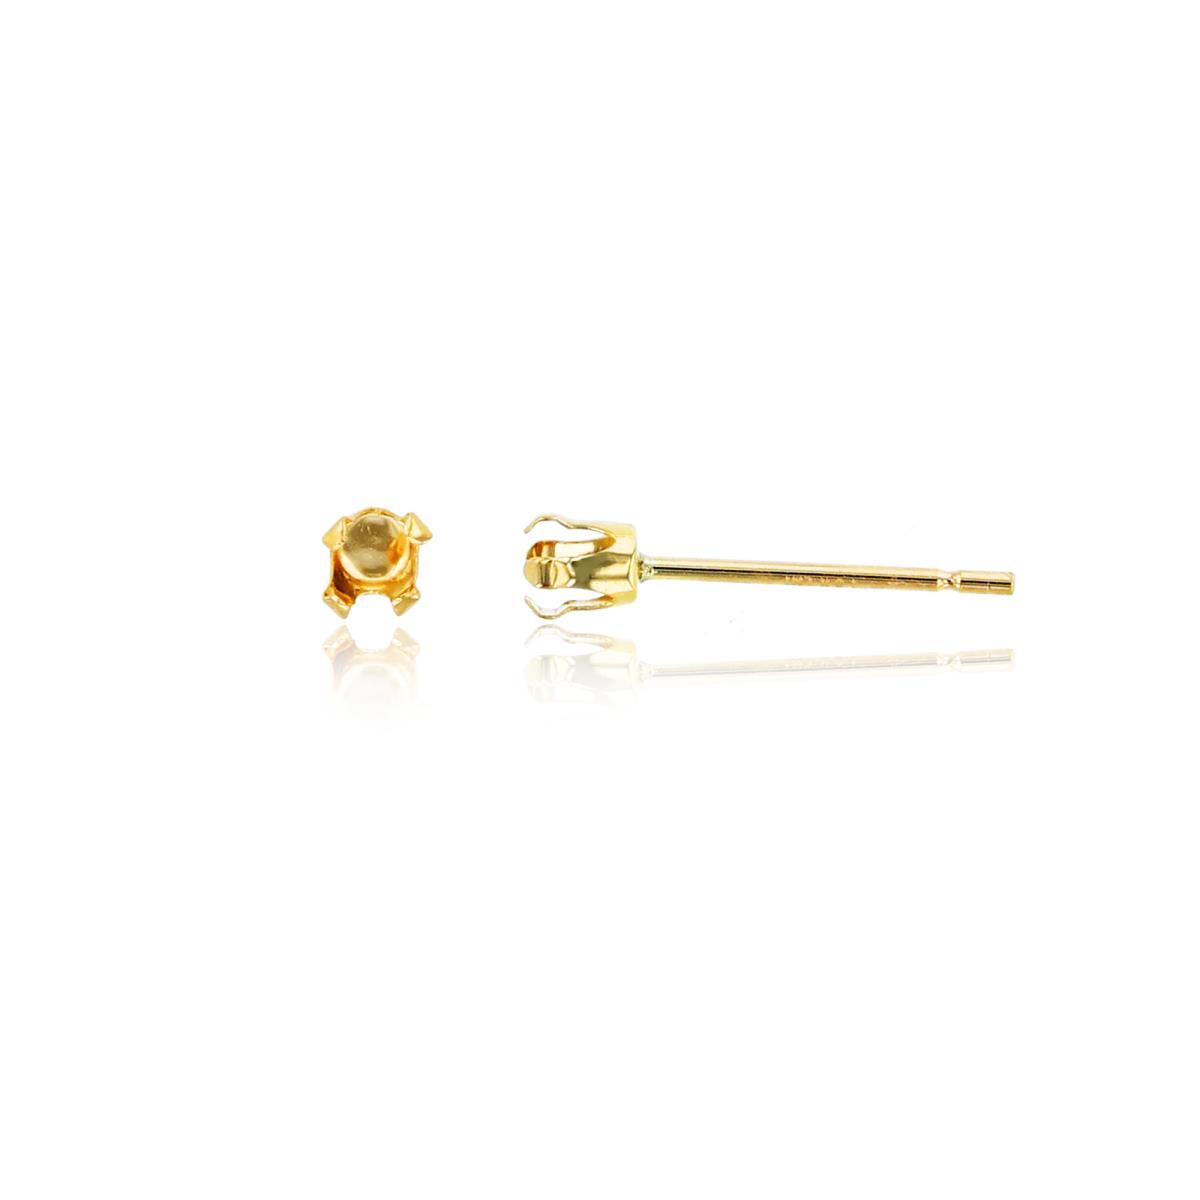 10K Yellow Gold 3mm Rd 4-Prong Stud Finding (PR)